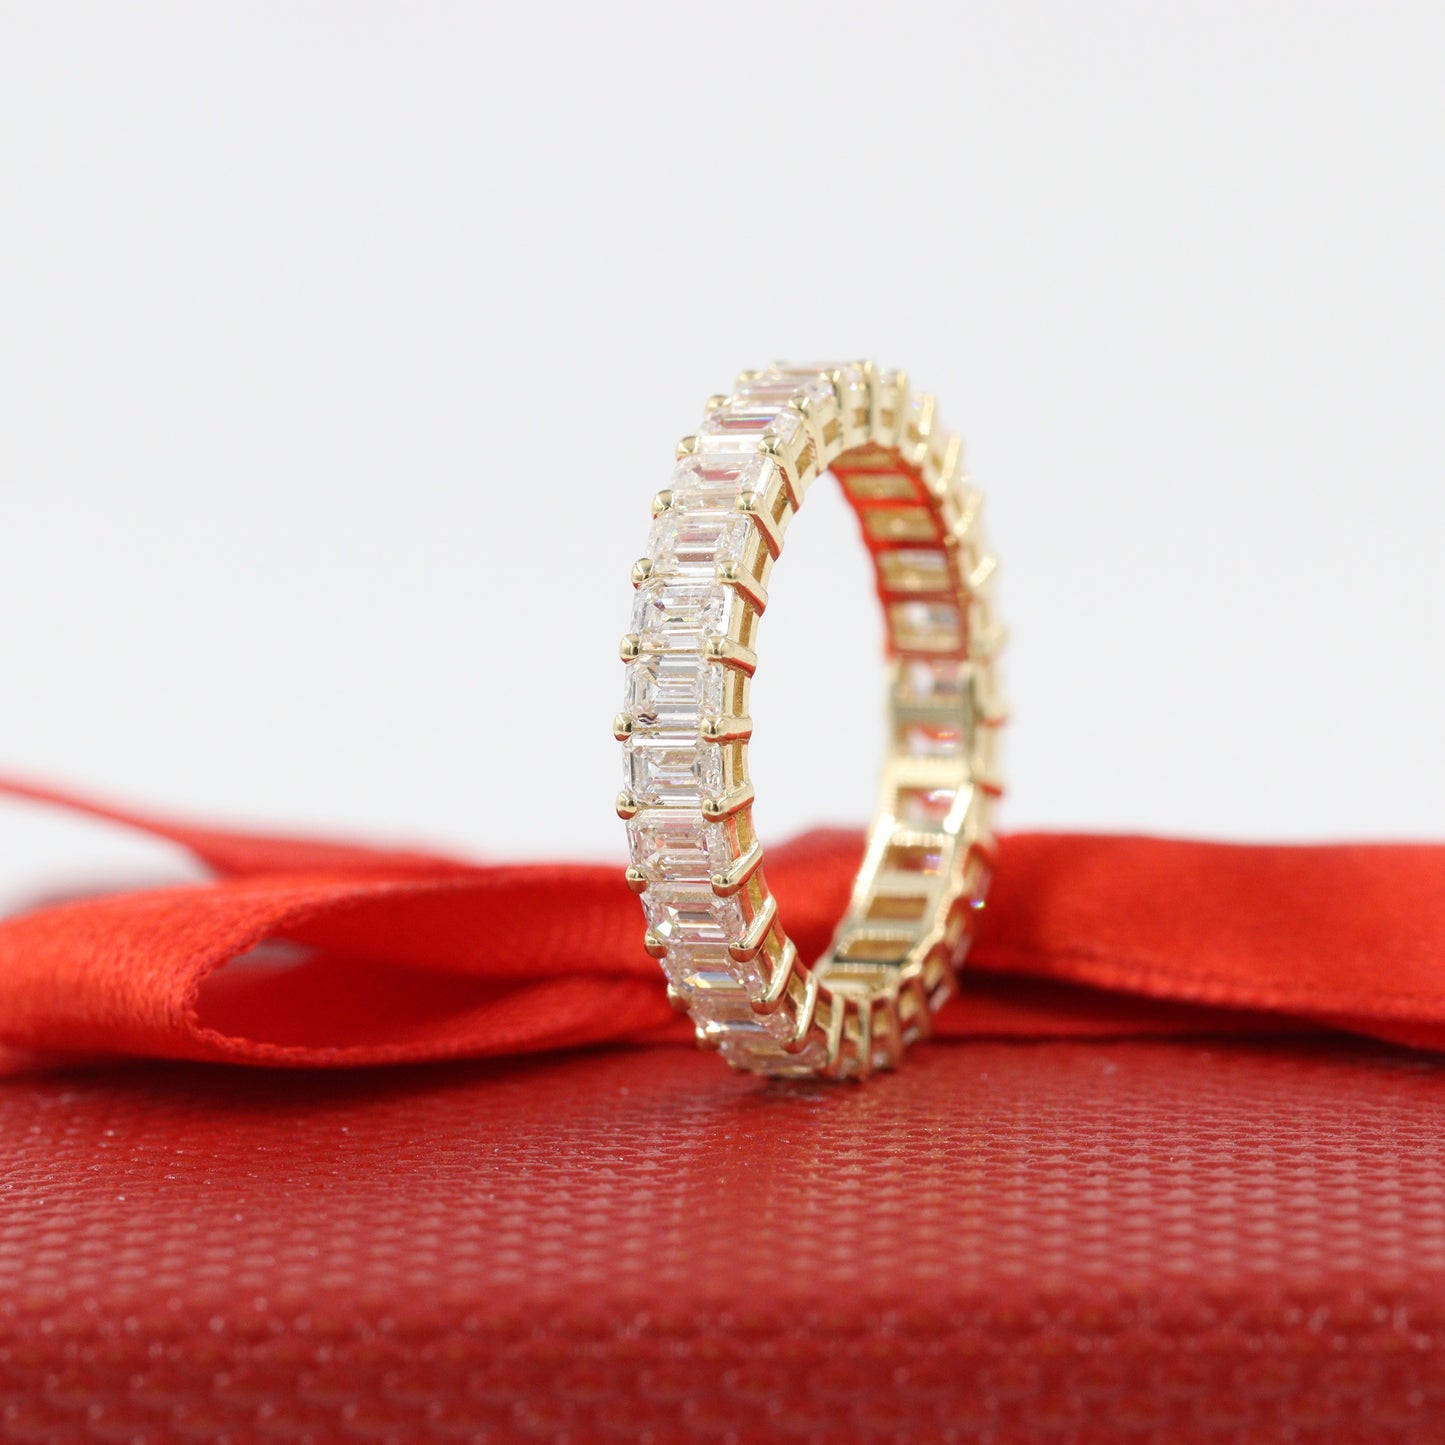 2.8ct Emerald Cut 28stones Diamond Full Eternity Wedding Band with Double Wire Setting/Full Eternity Emerald Cut Diamond Band